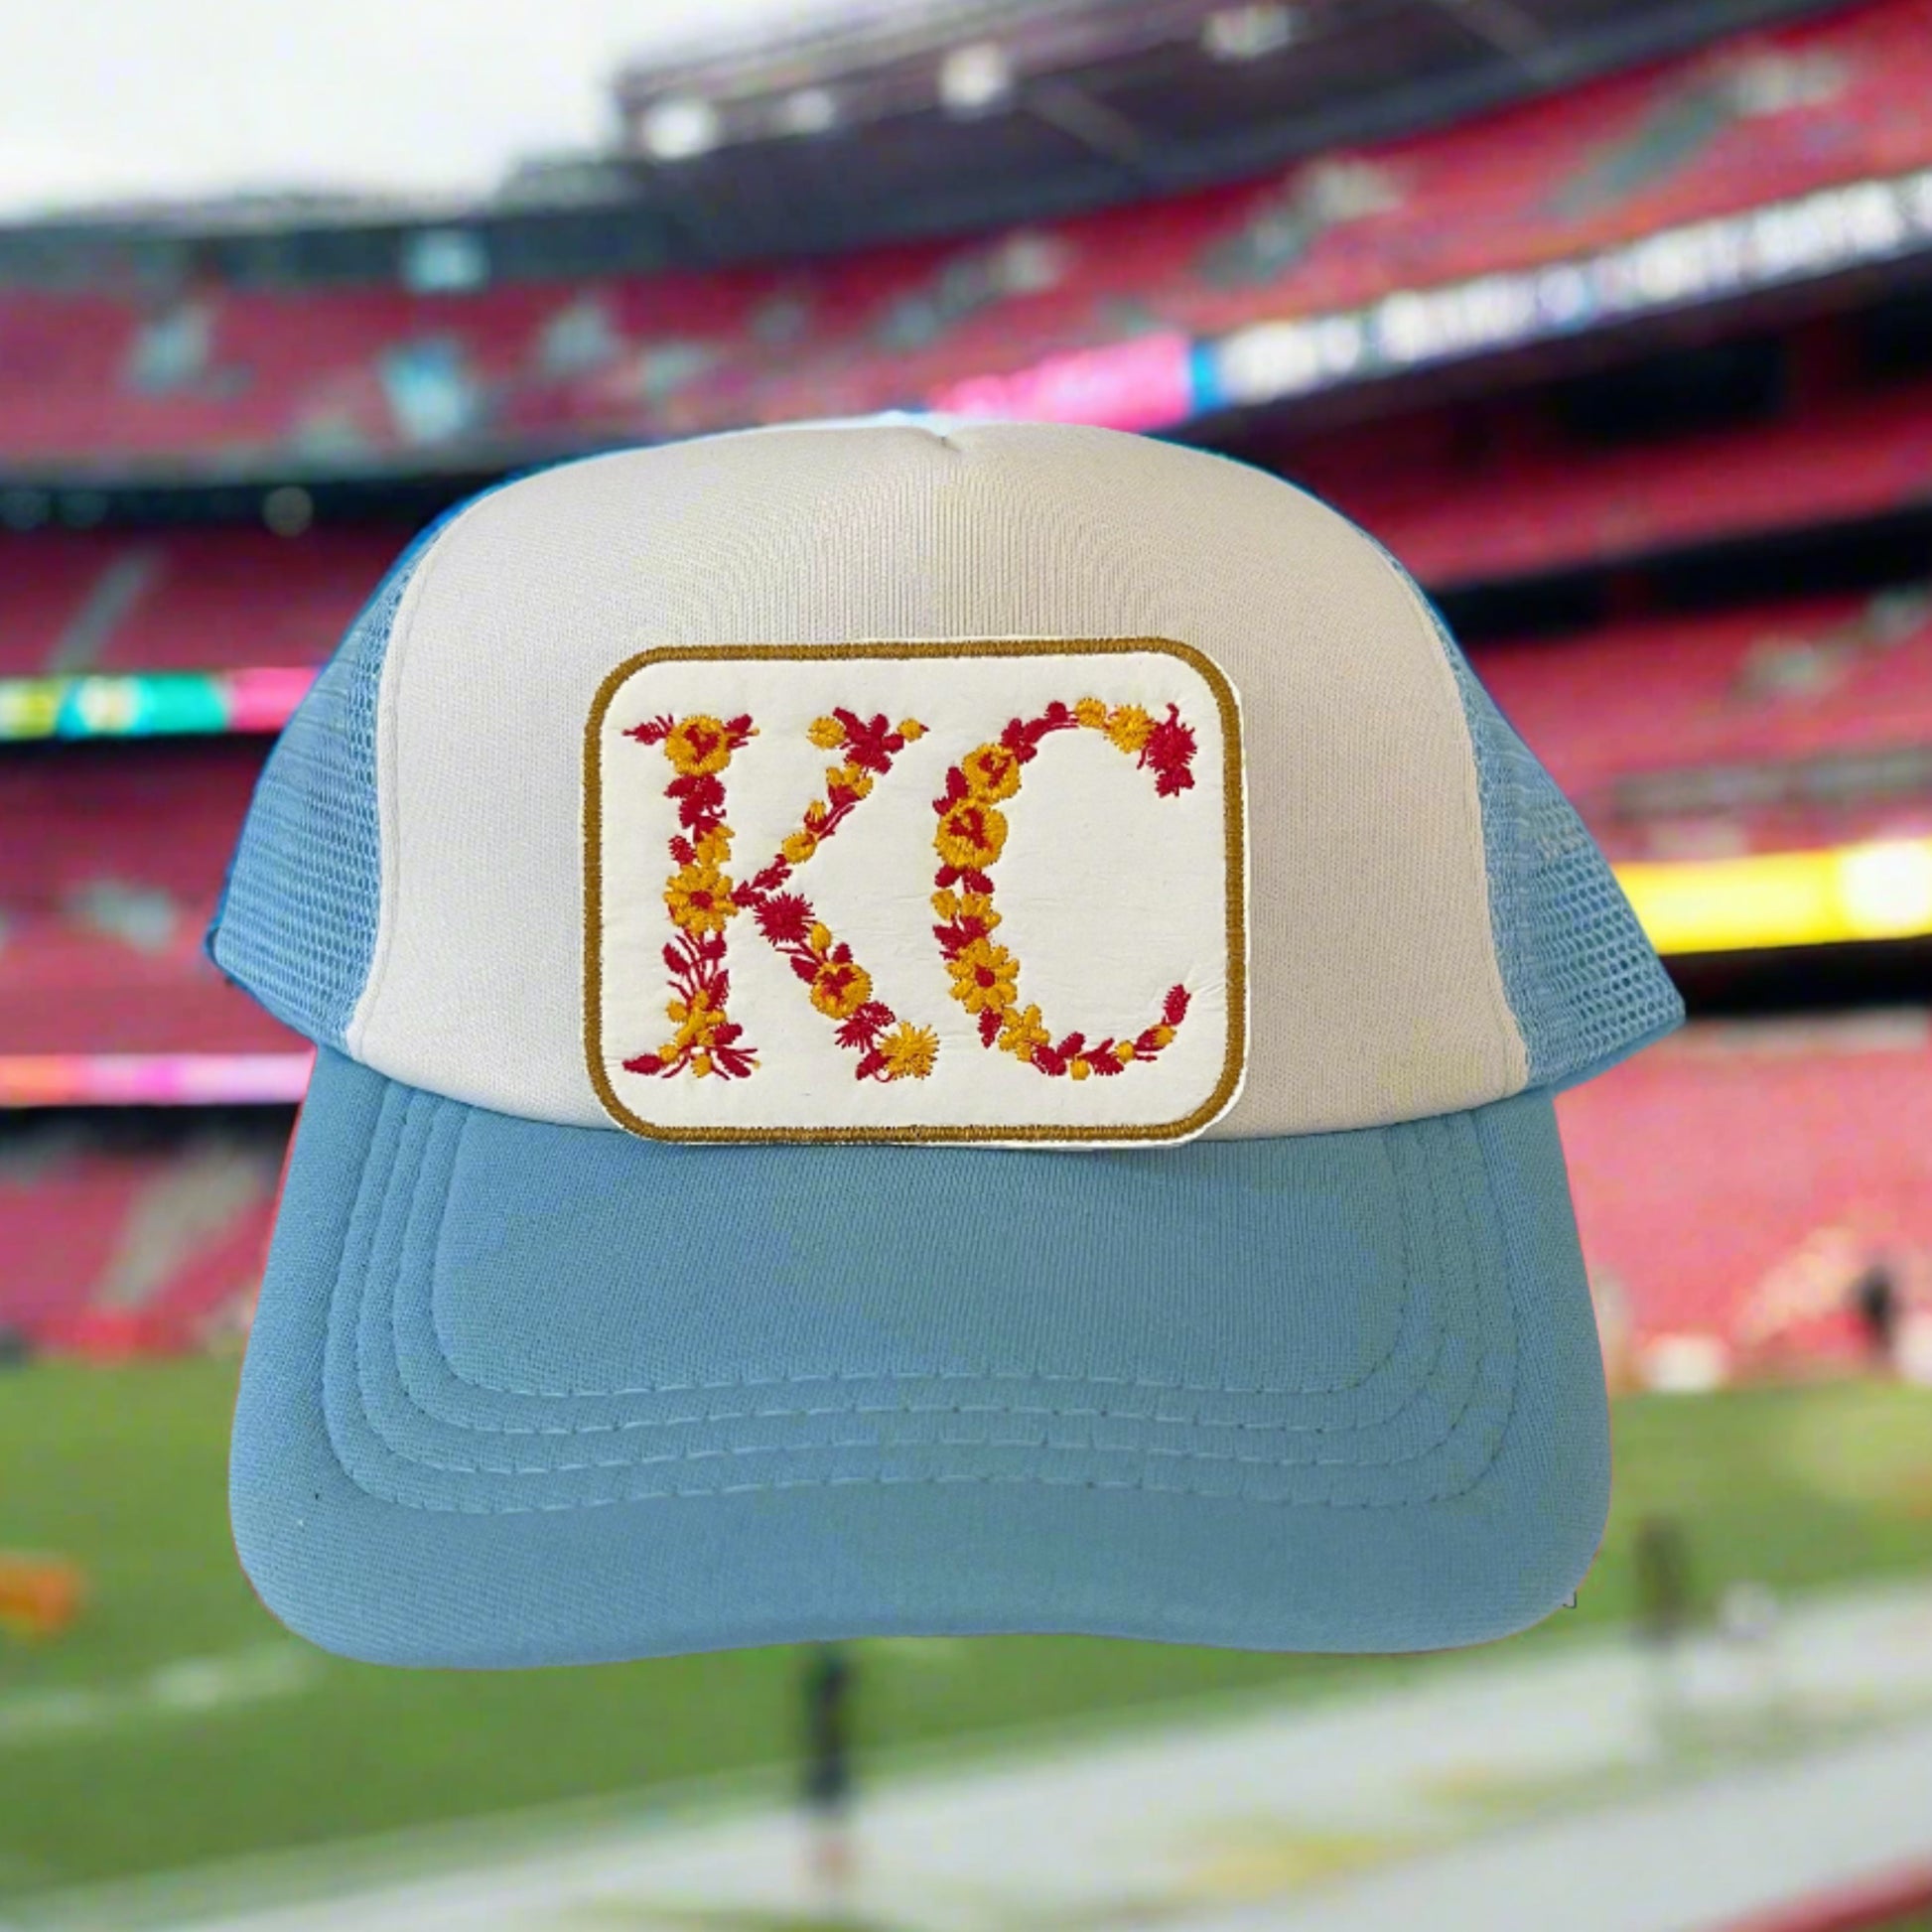 Iron-on patch featuring the letters "KC" adorned with vibrant flowers, showcasing a stylish and artistic retro design.